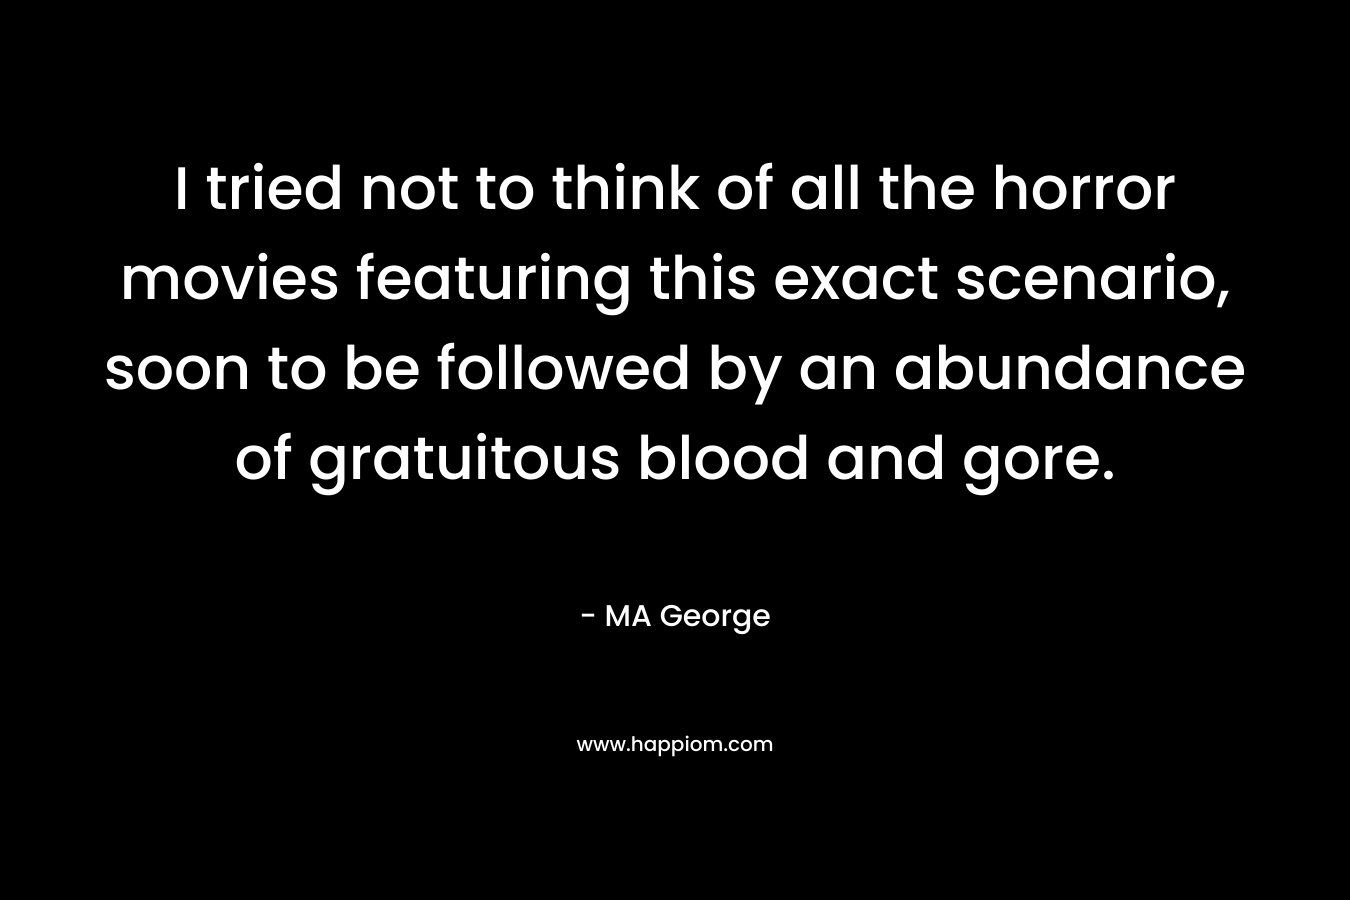 I tried not to think of all the horror movies featuring this exact scenario, soon to be followed by an abundance of gratuitous blood and gore.